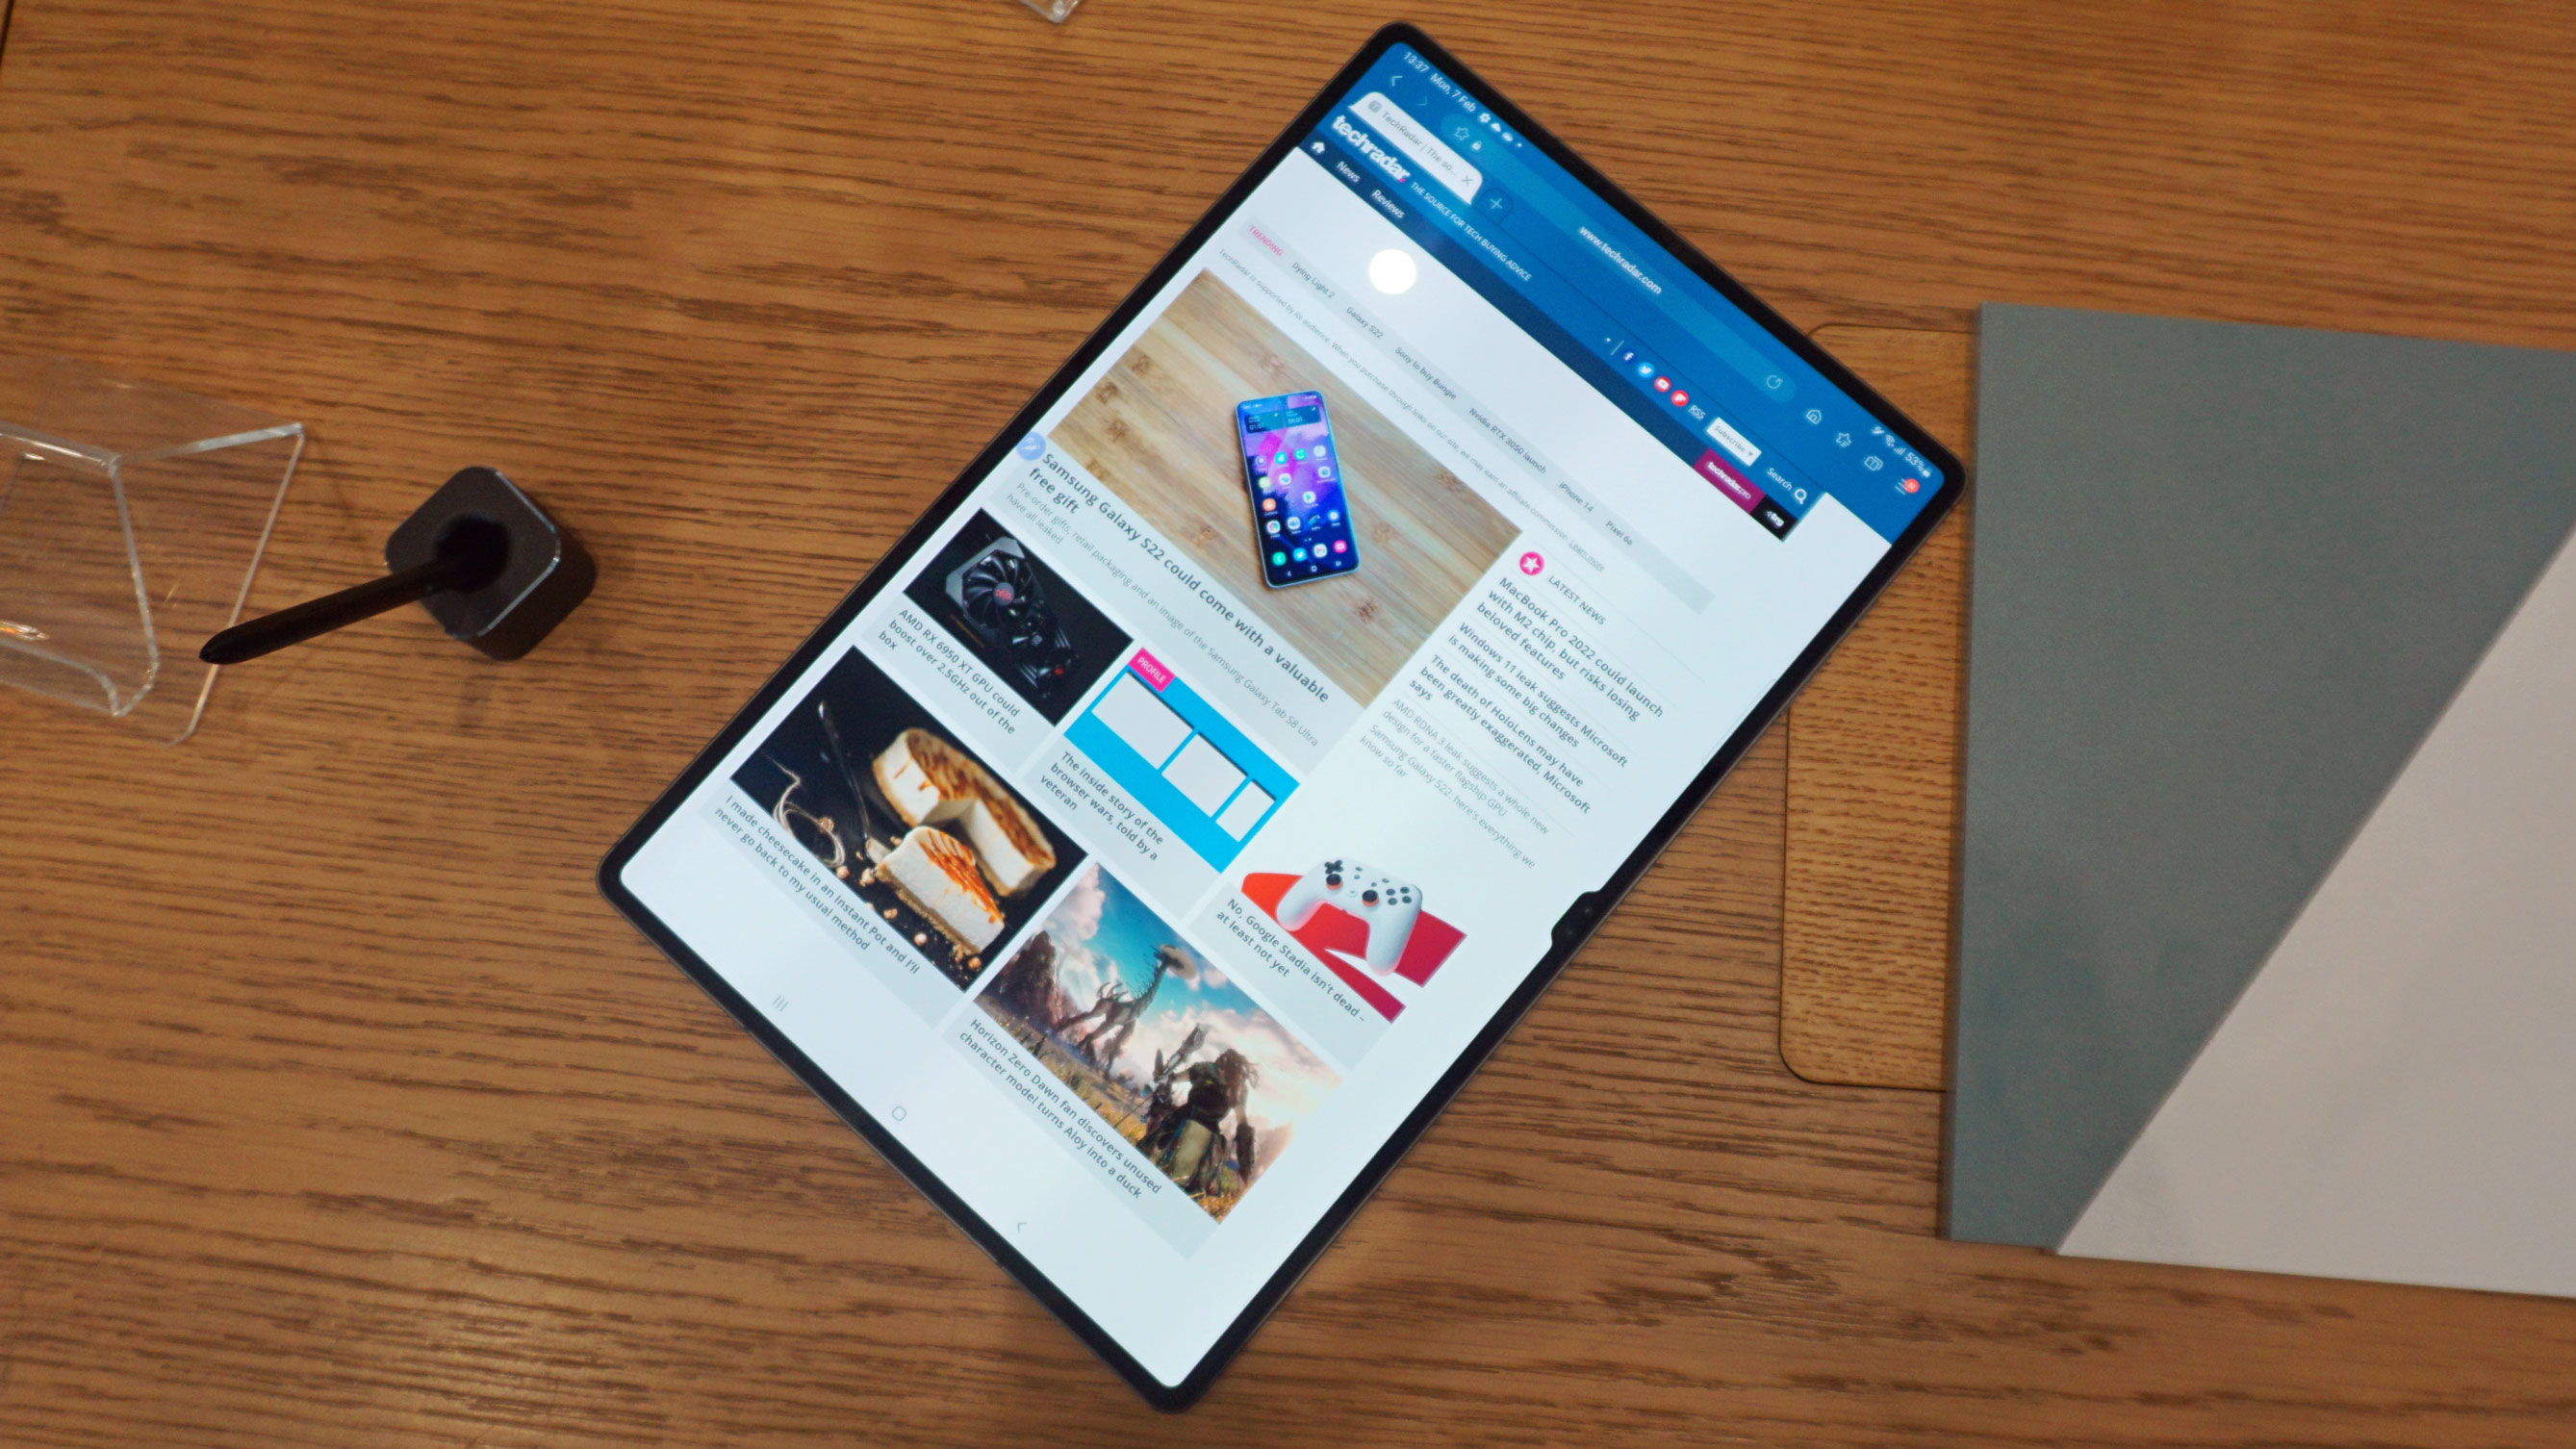 Samsung Galaxy Tab S8 and Tab S8 Plus hands-on review: big and bigger